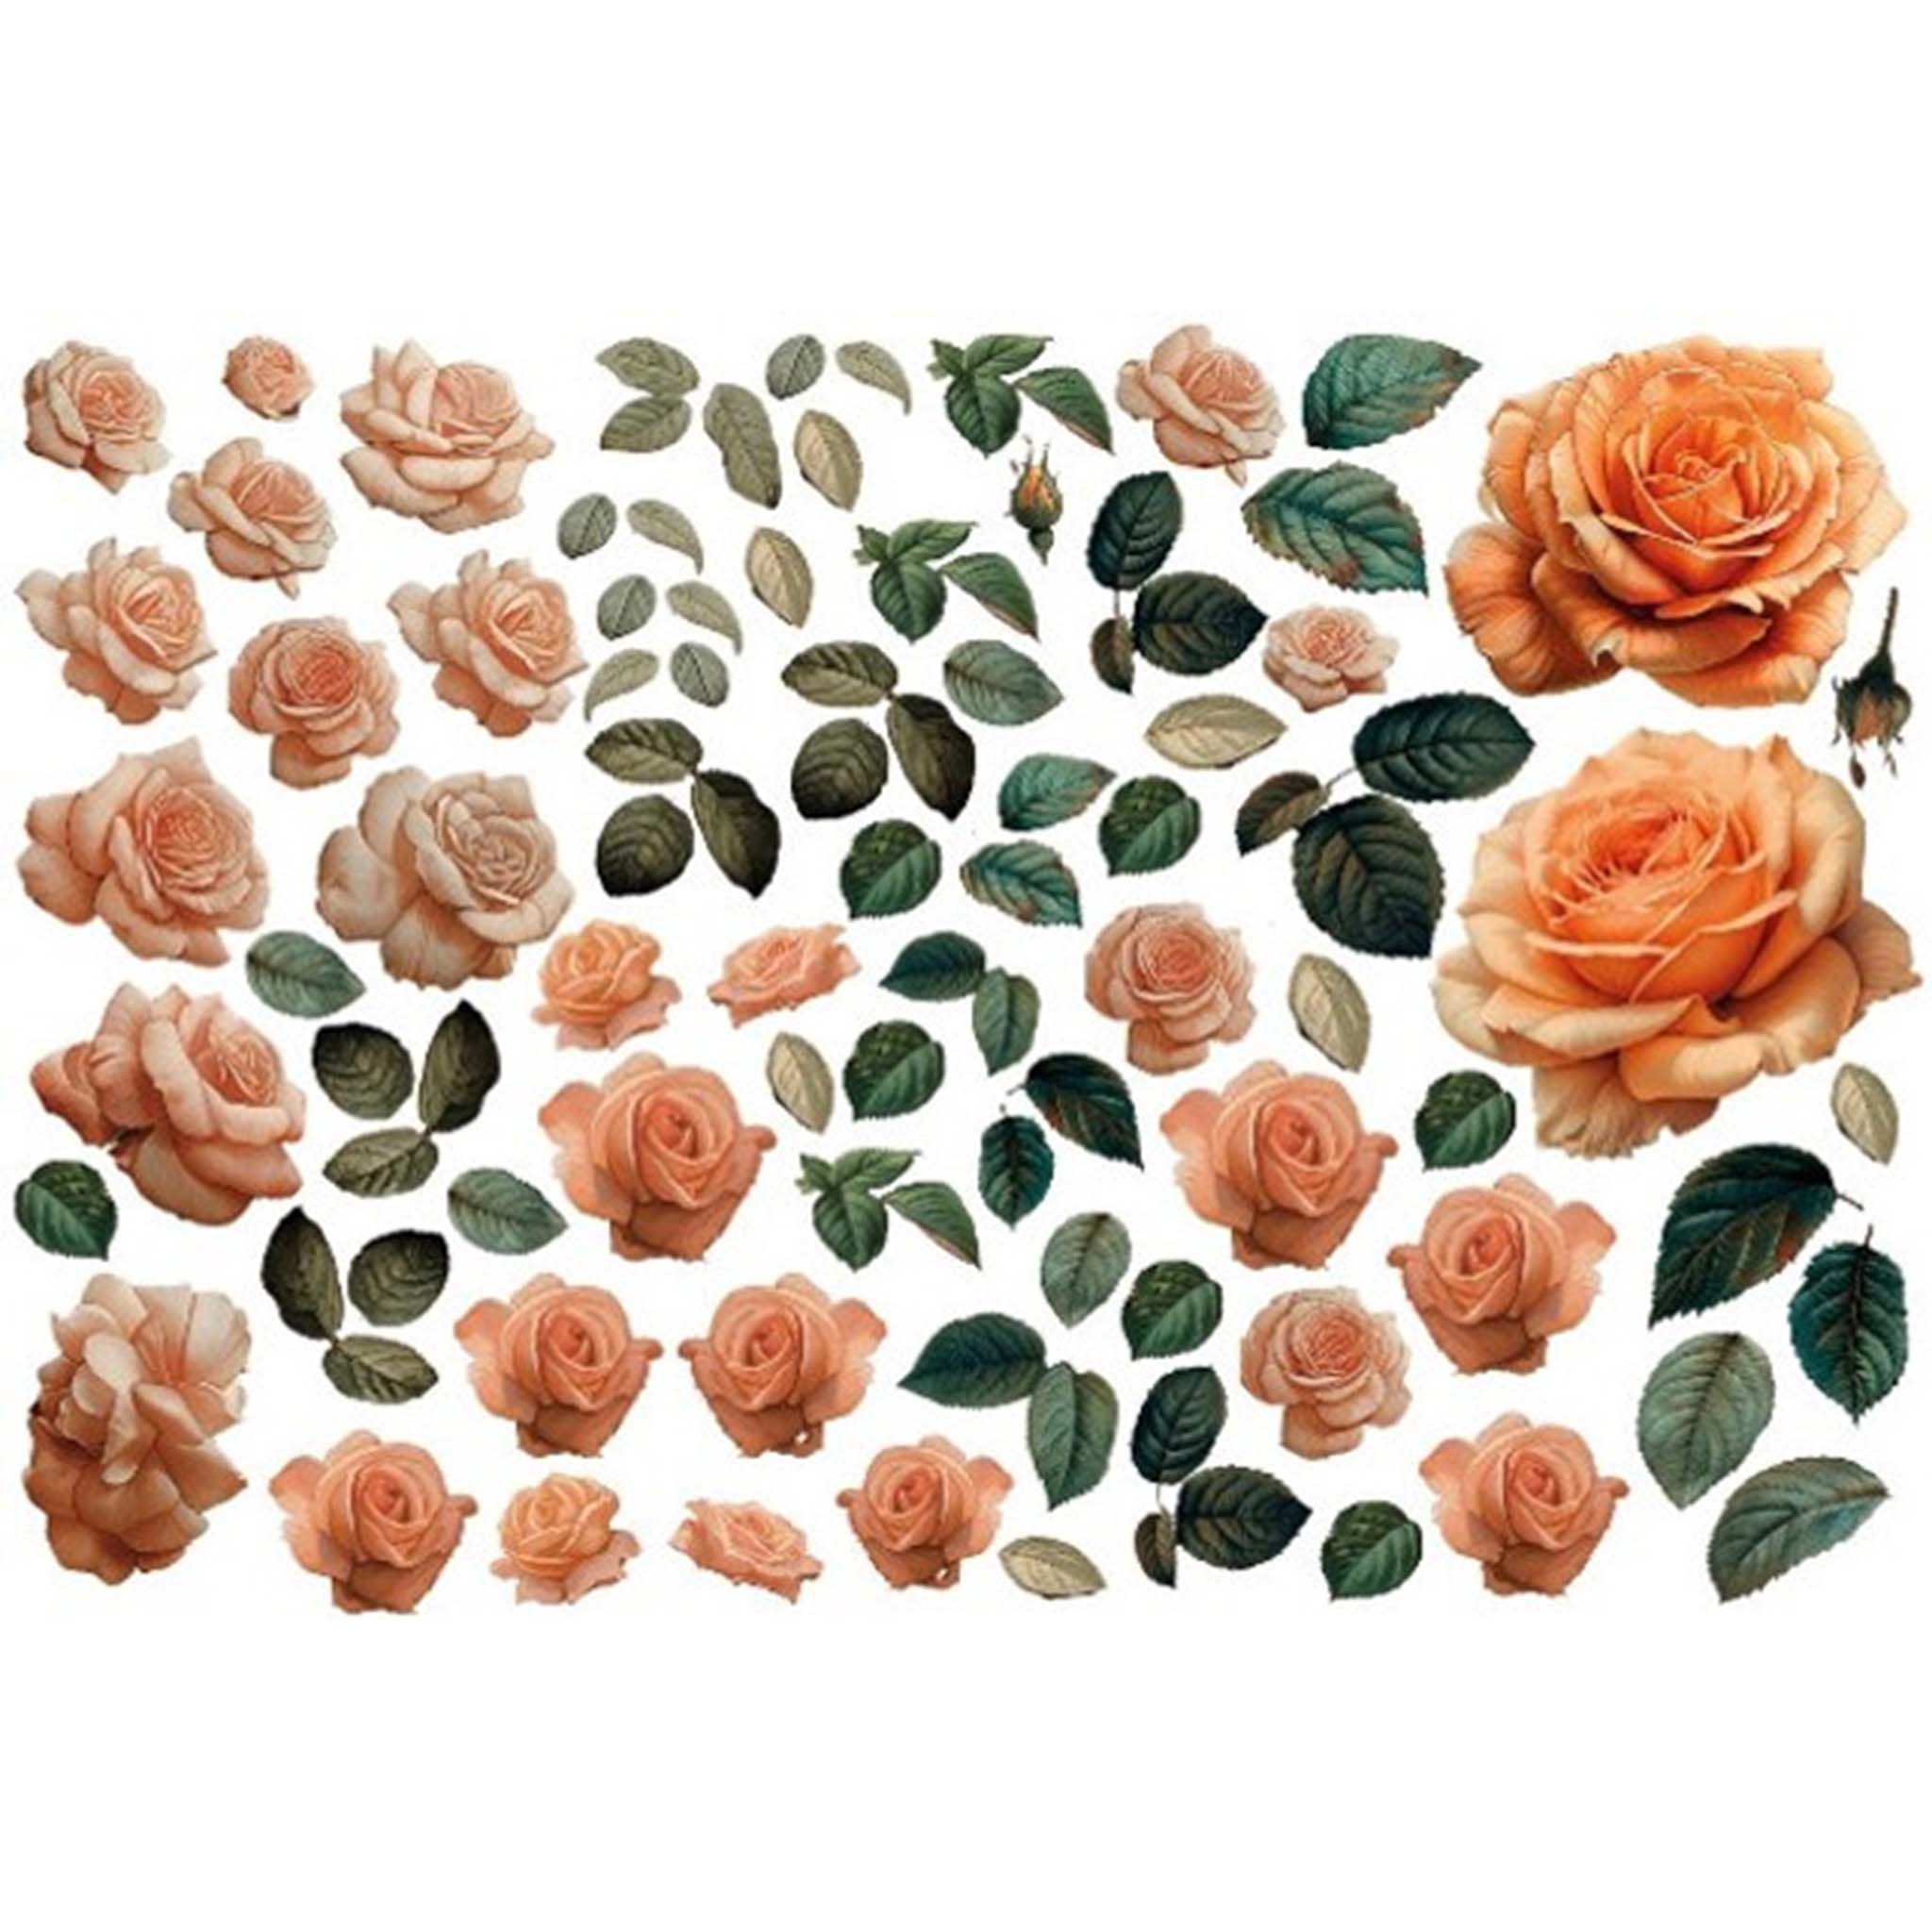 A4 Plus rice paper design that featuring individual rose blooms of varying sizes and leaves against a white background.